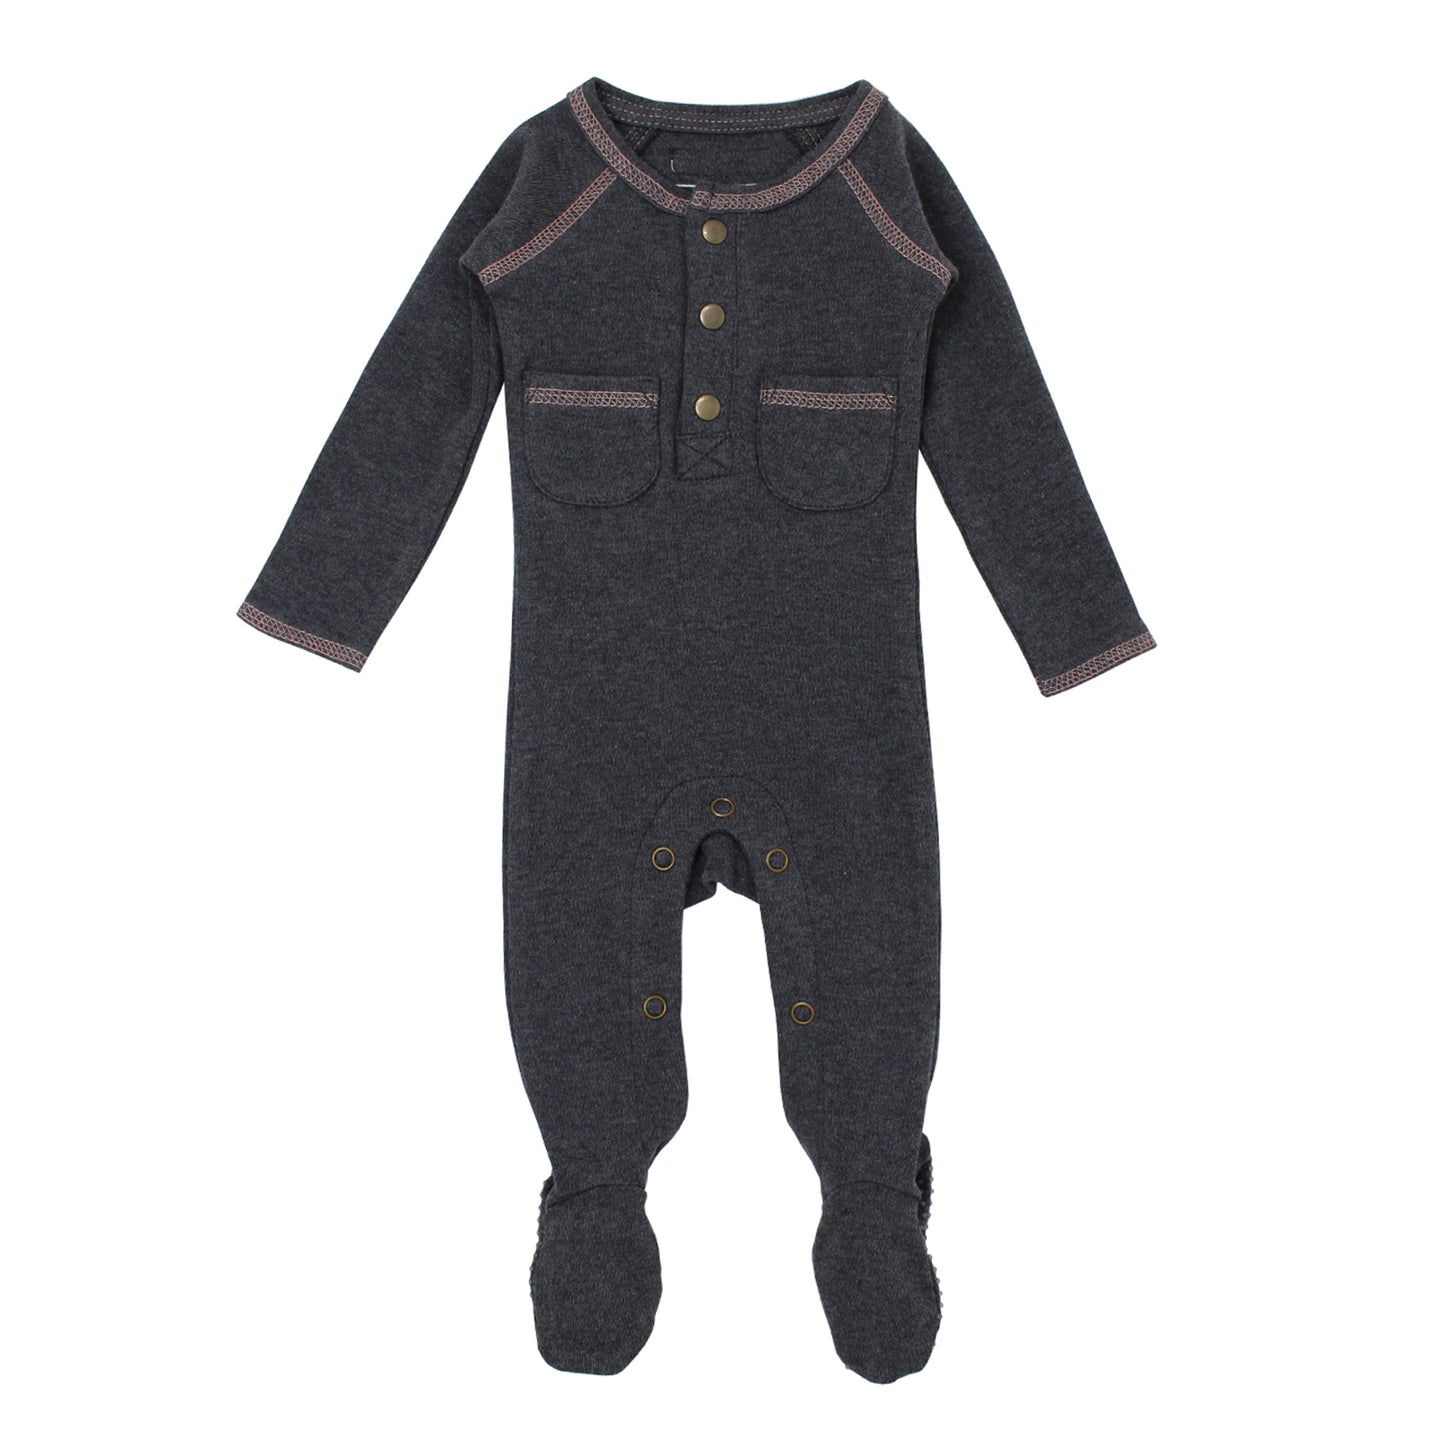 L'Oved Baby OR474 Organic Pocket Footie